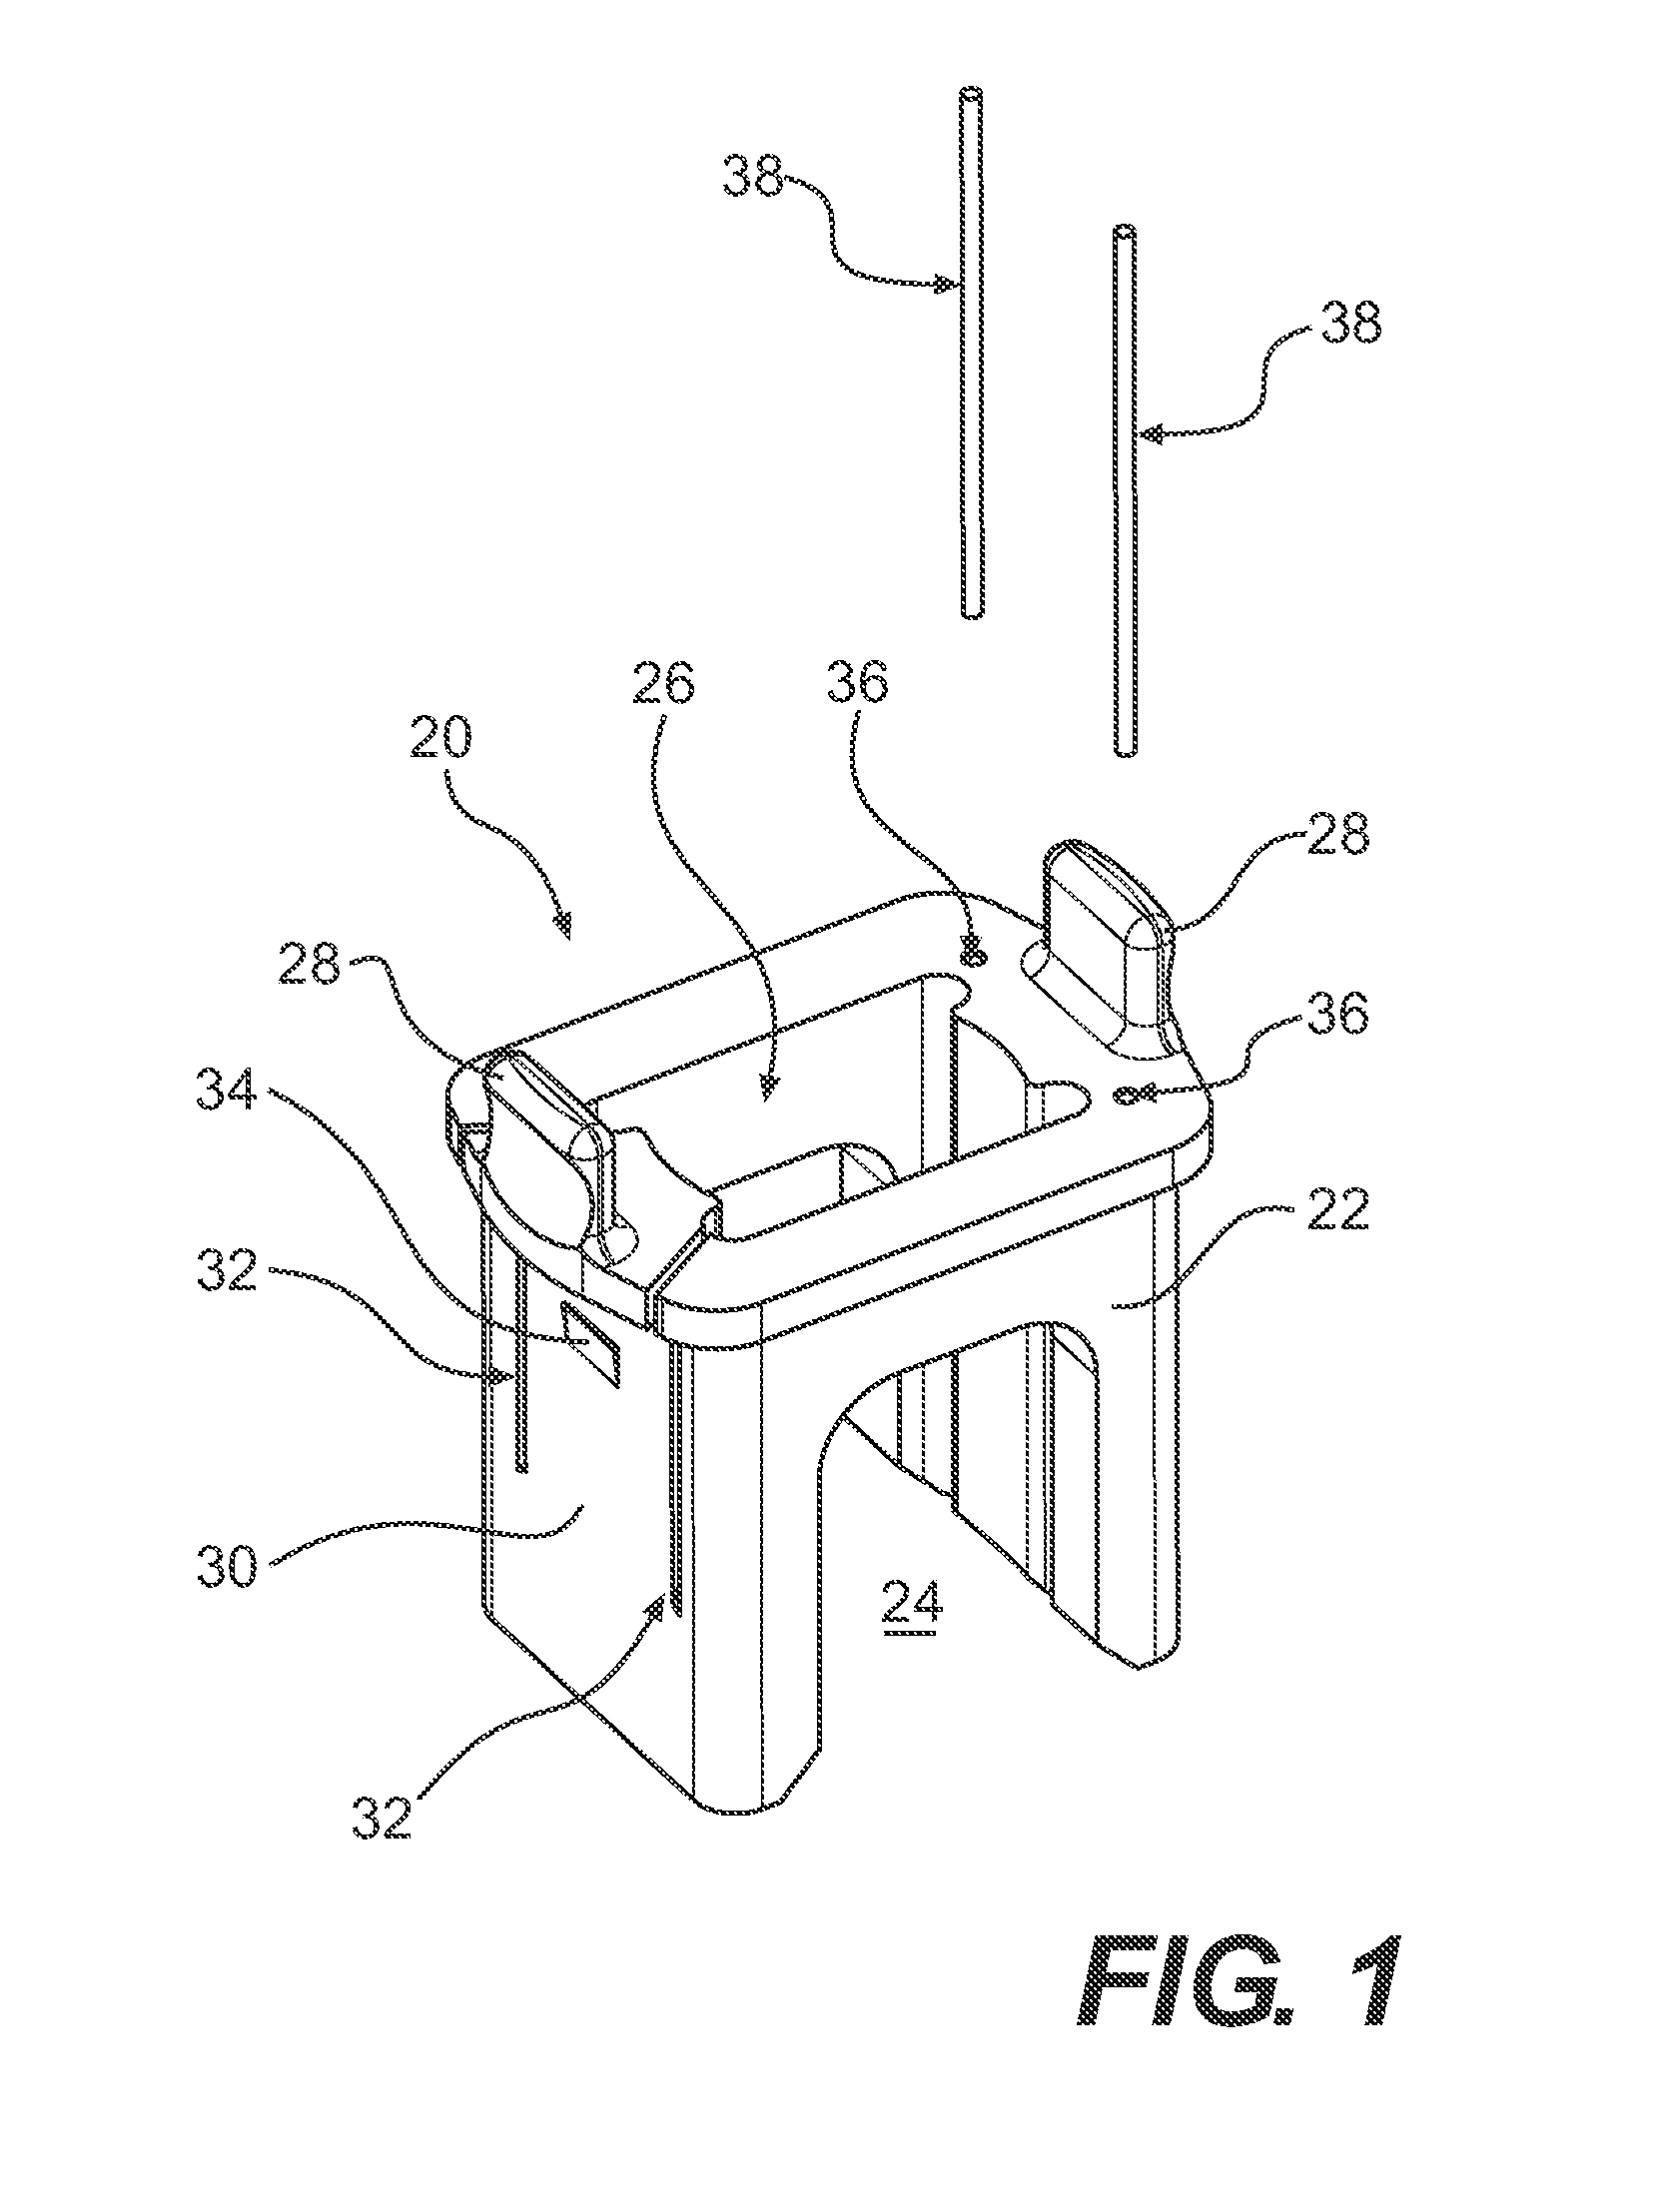 Method and system for performing interspinous space preparation for receiving an implant